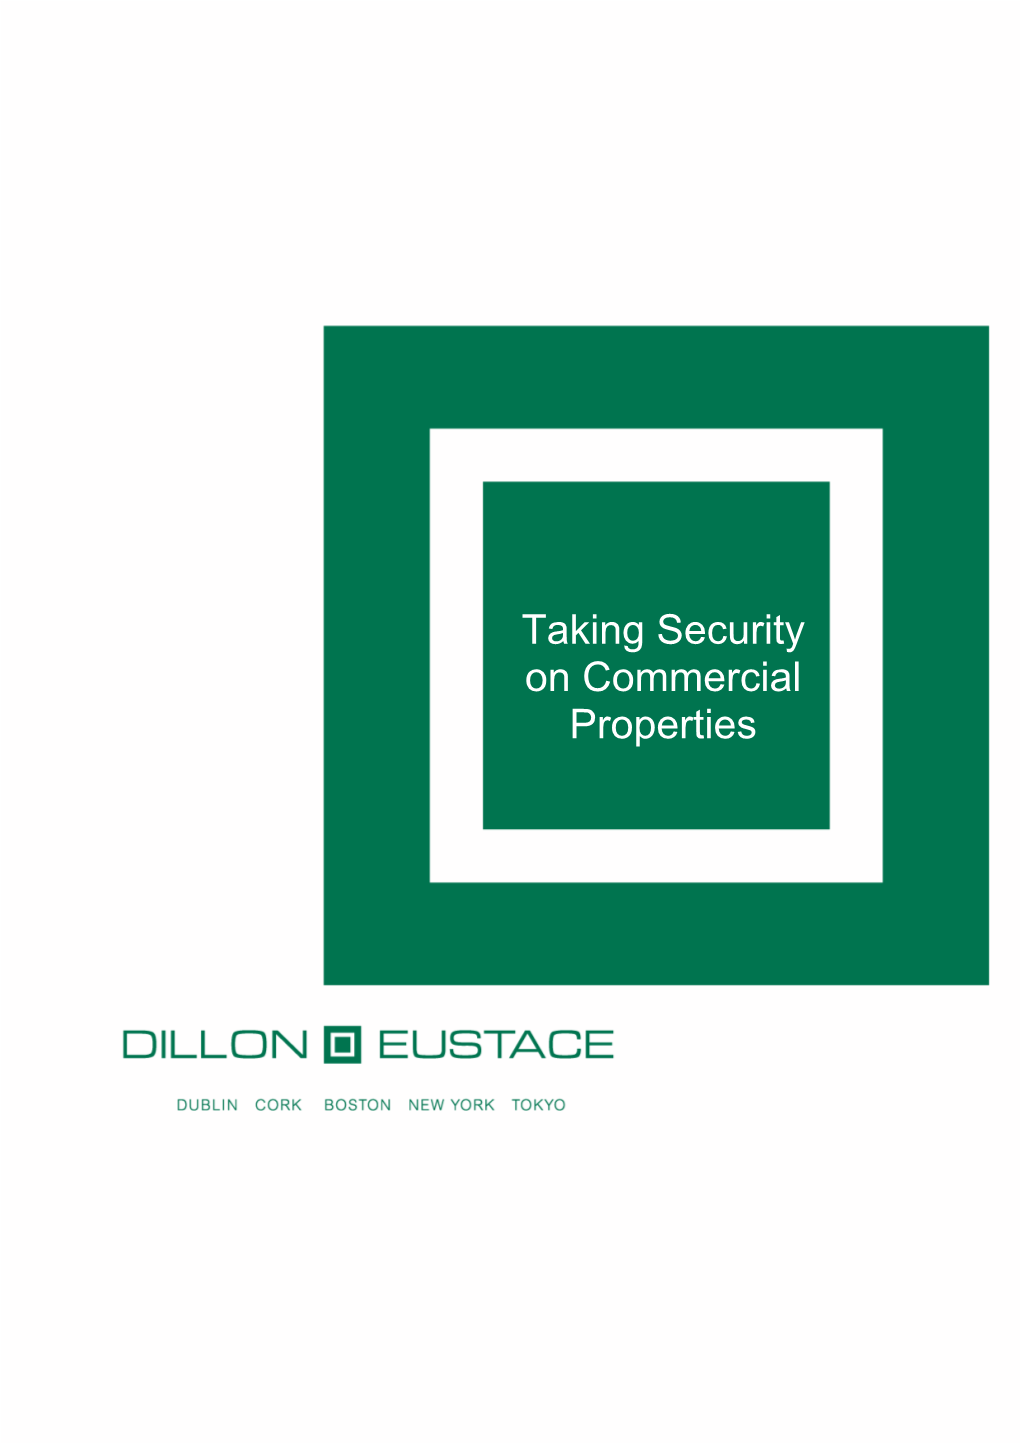 Taking Security on Commercial Properties